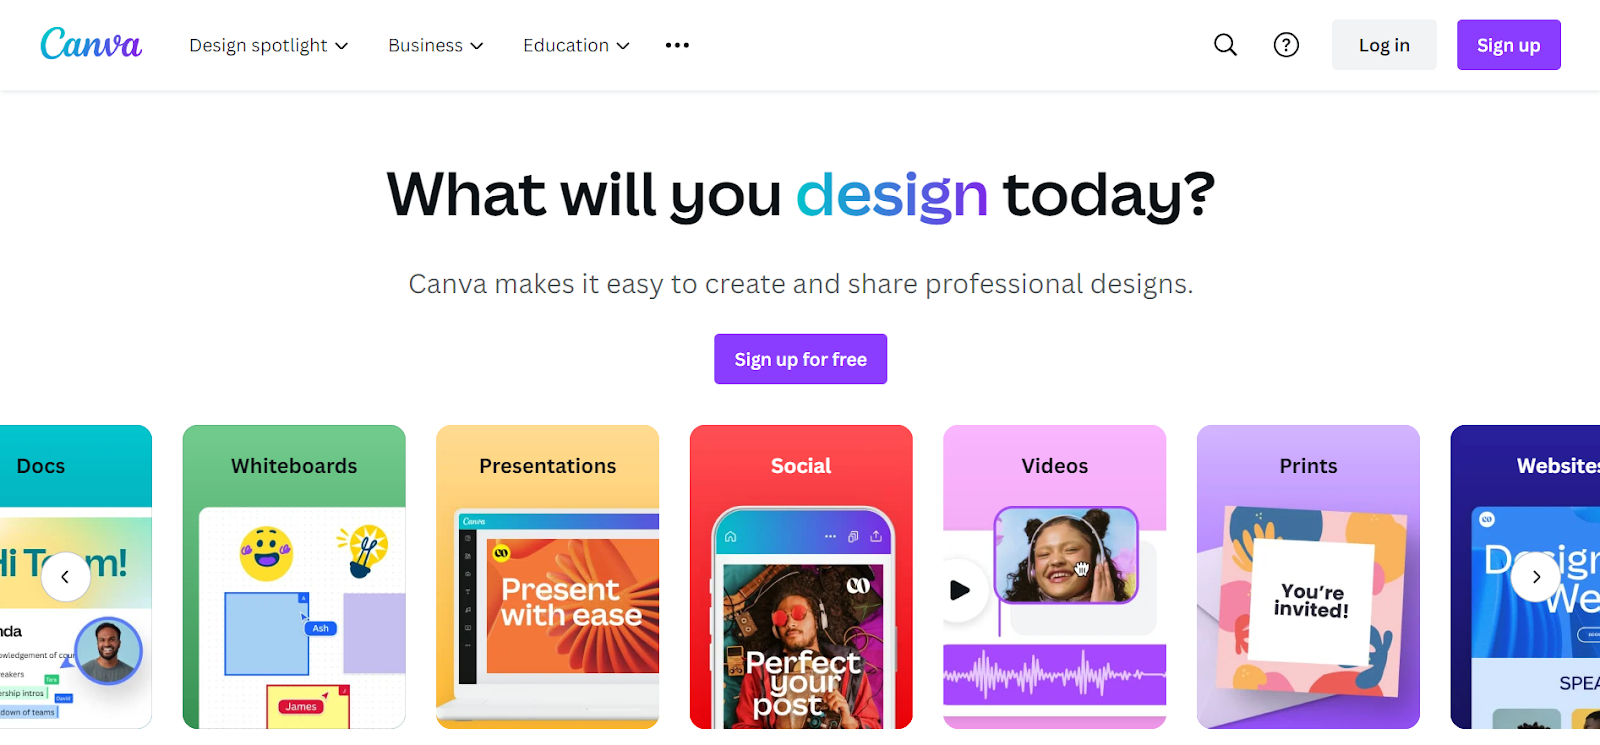 Canva is a simplet tool for content creation